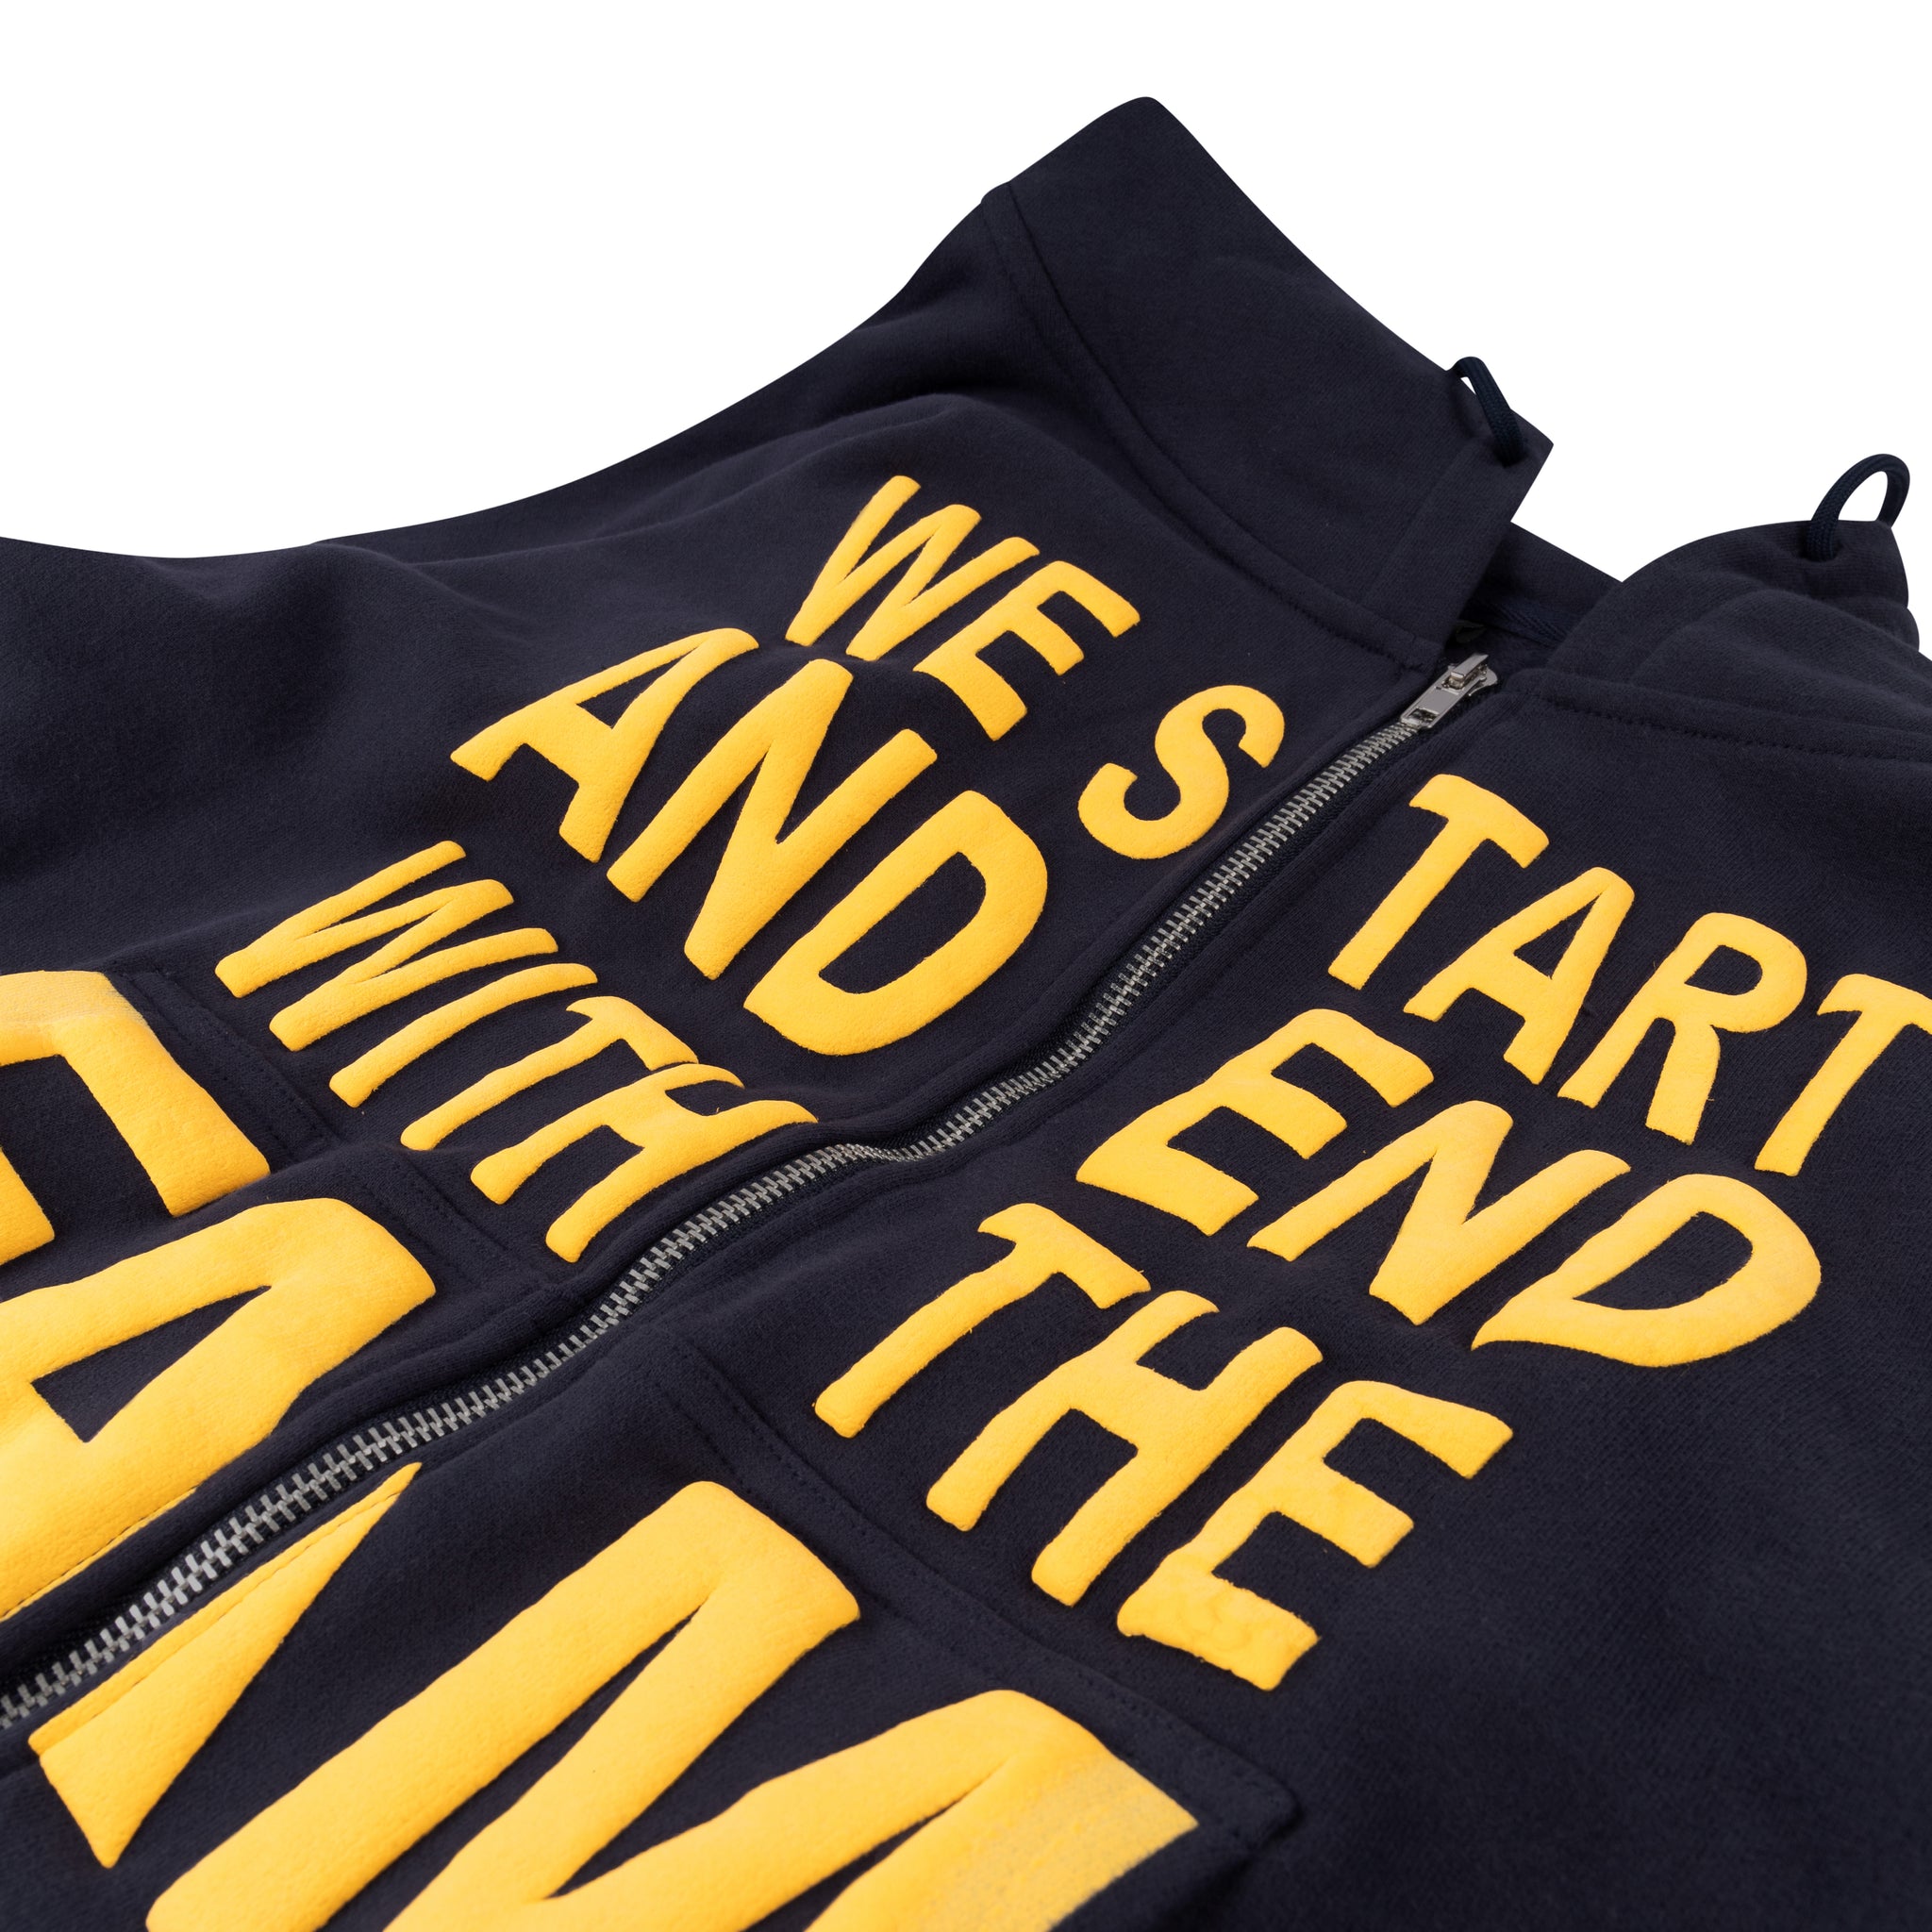 WE START AND END WITH THEE FAM zipper navy blue - yellow